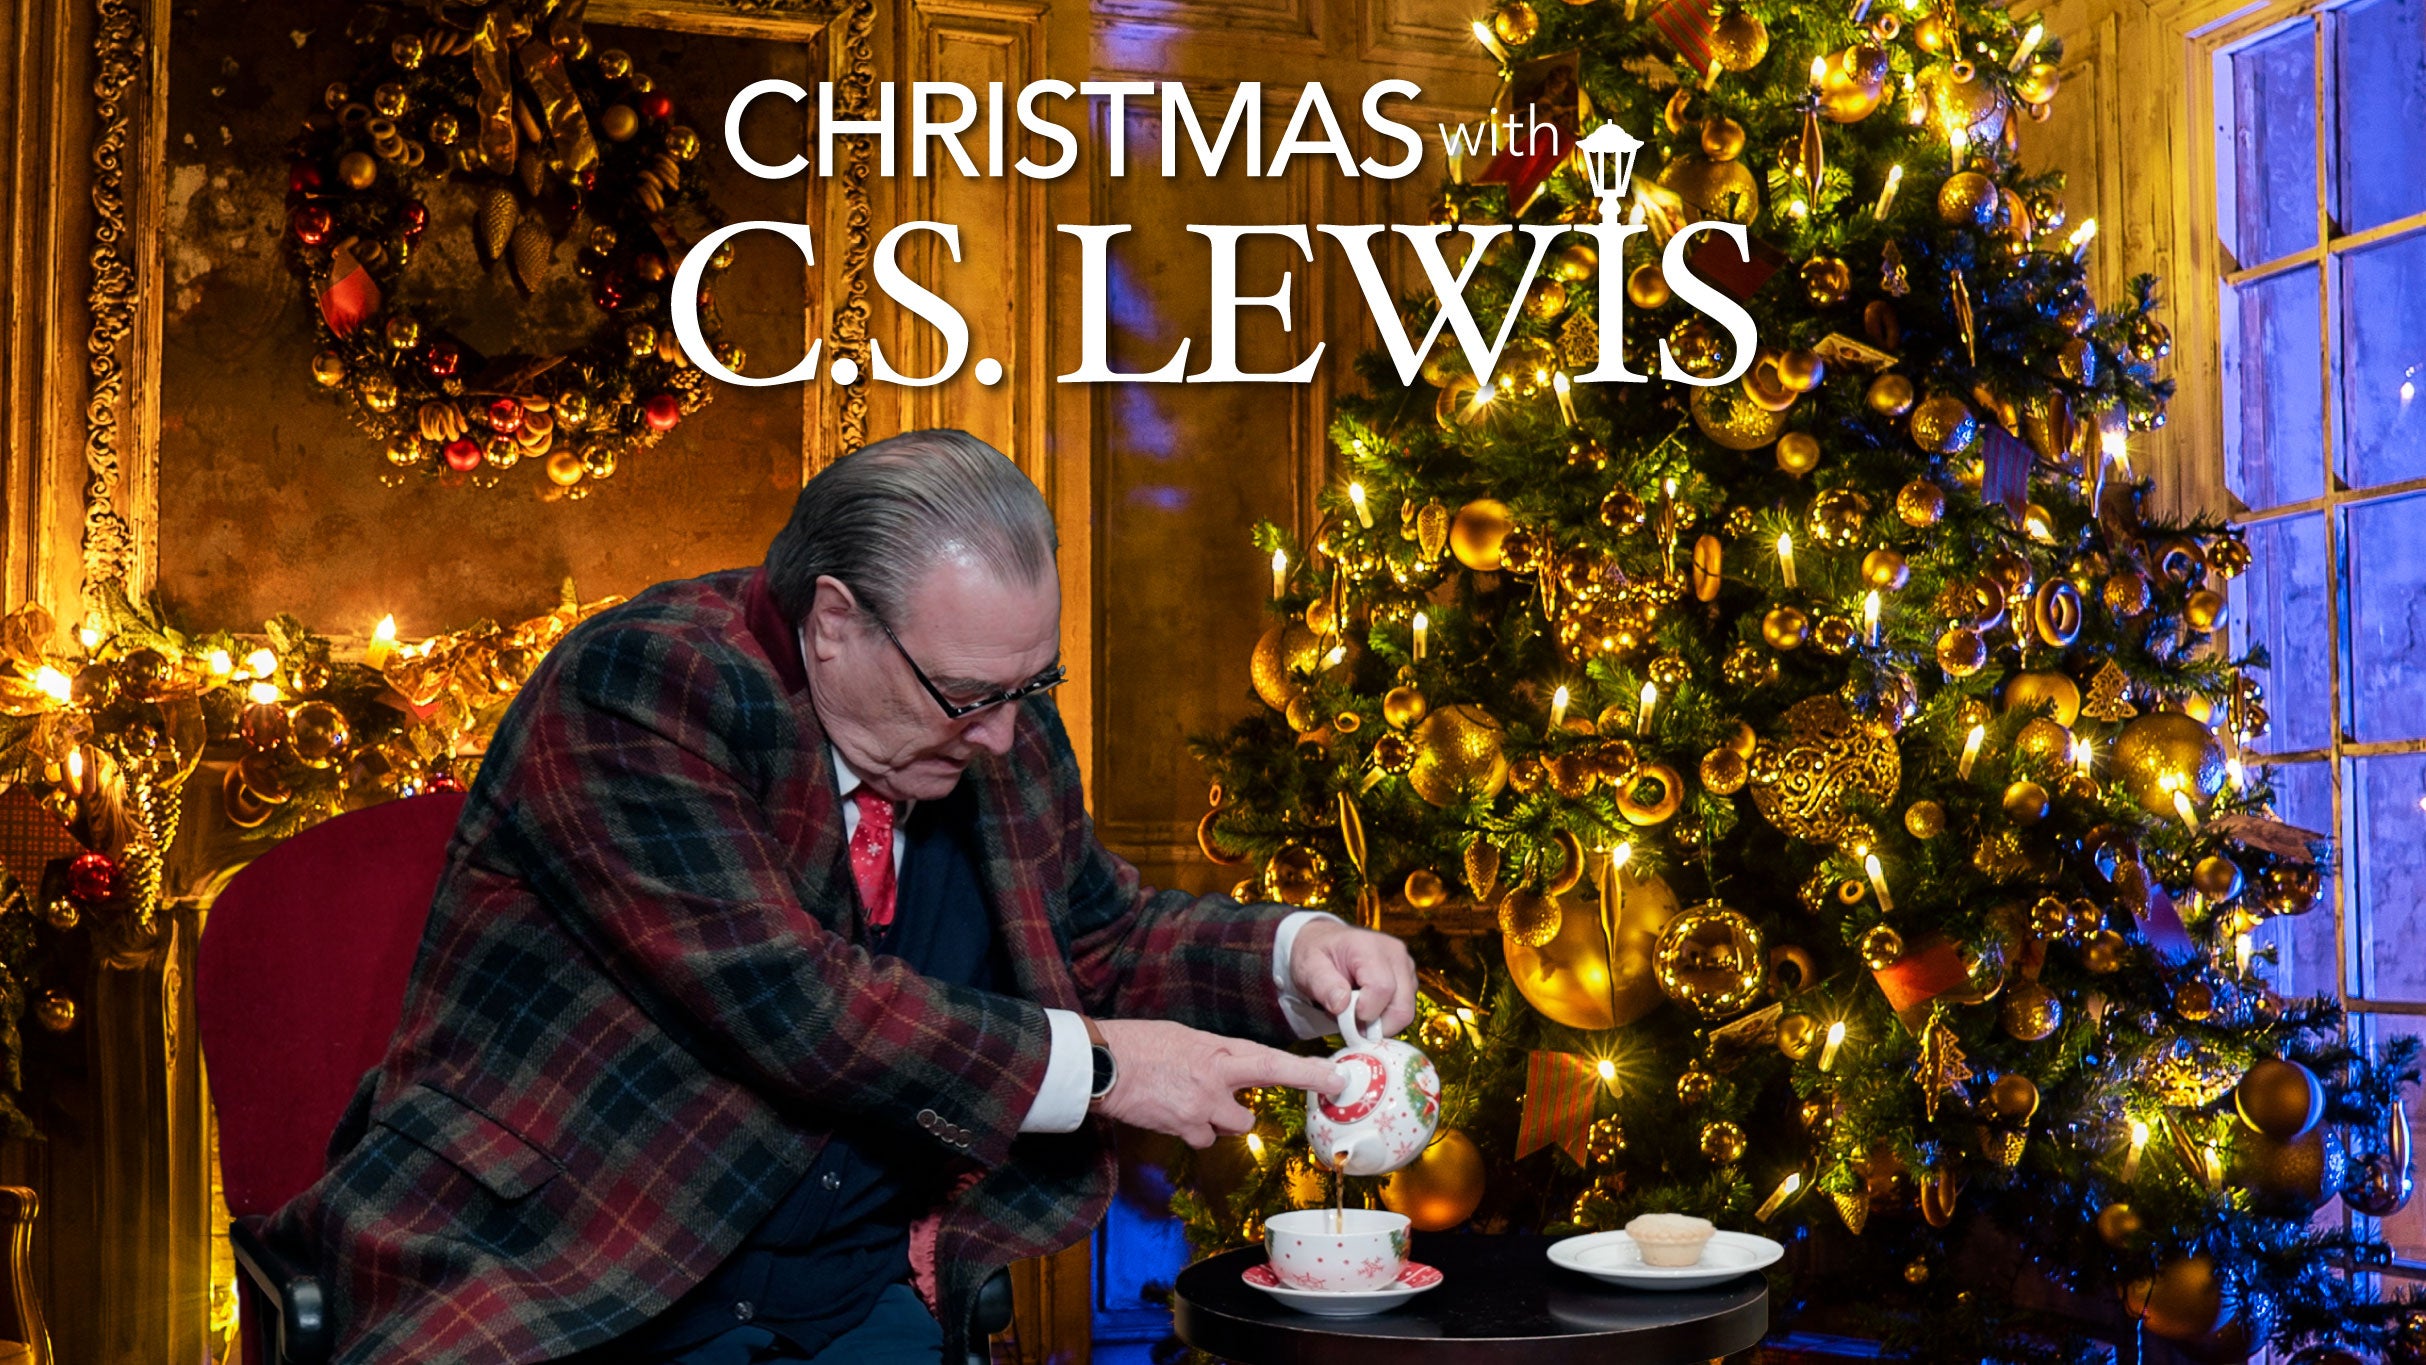 Christmas With C.S. Lewis (Chicago) in Chicago promo photo for 2 For 1 presale offer code